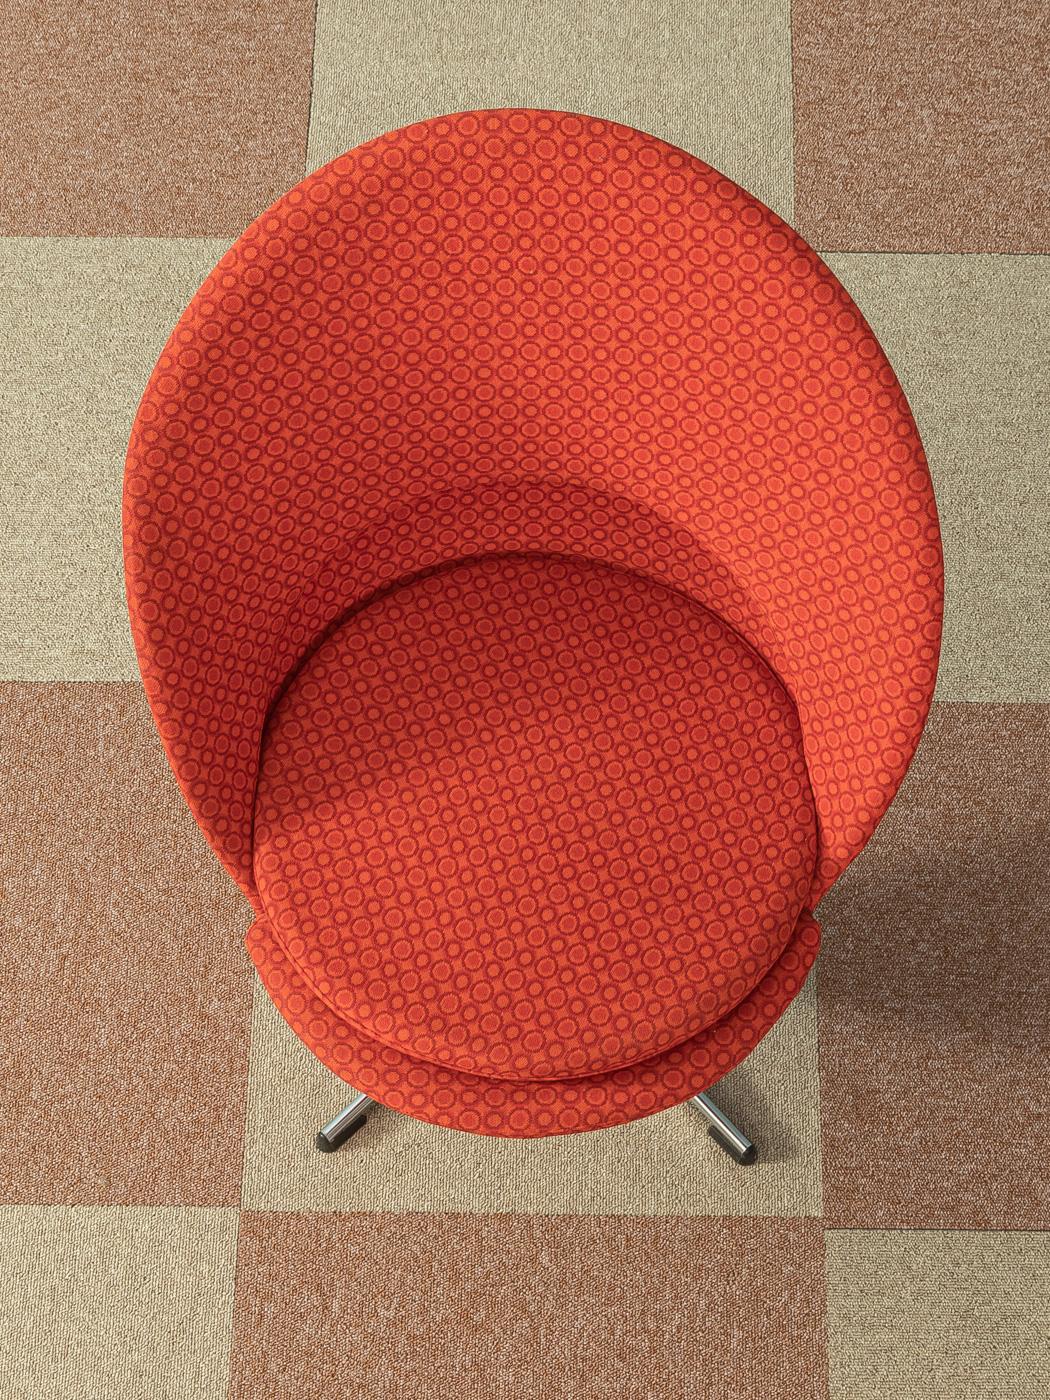 Cone Chair Seating Group Cone Table Verner Panton Red Blue Petrol Mustard For Sale 1